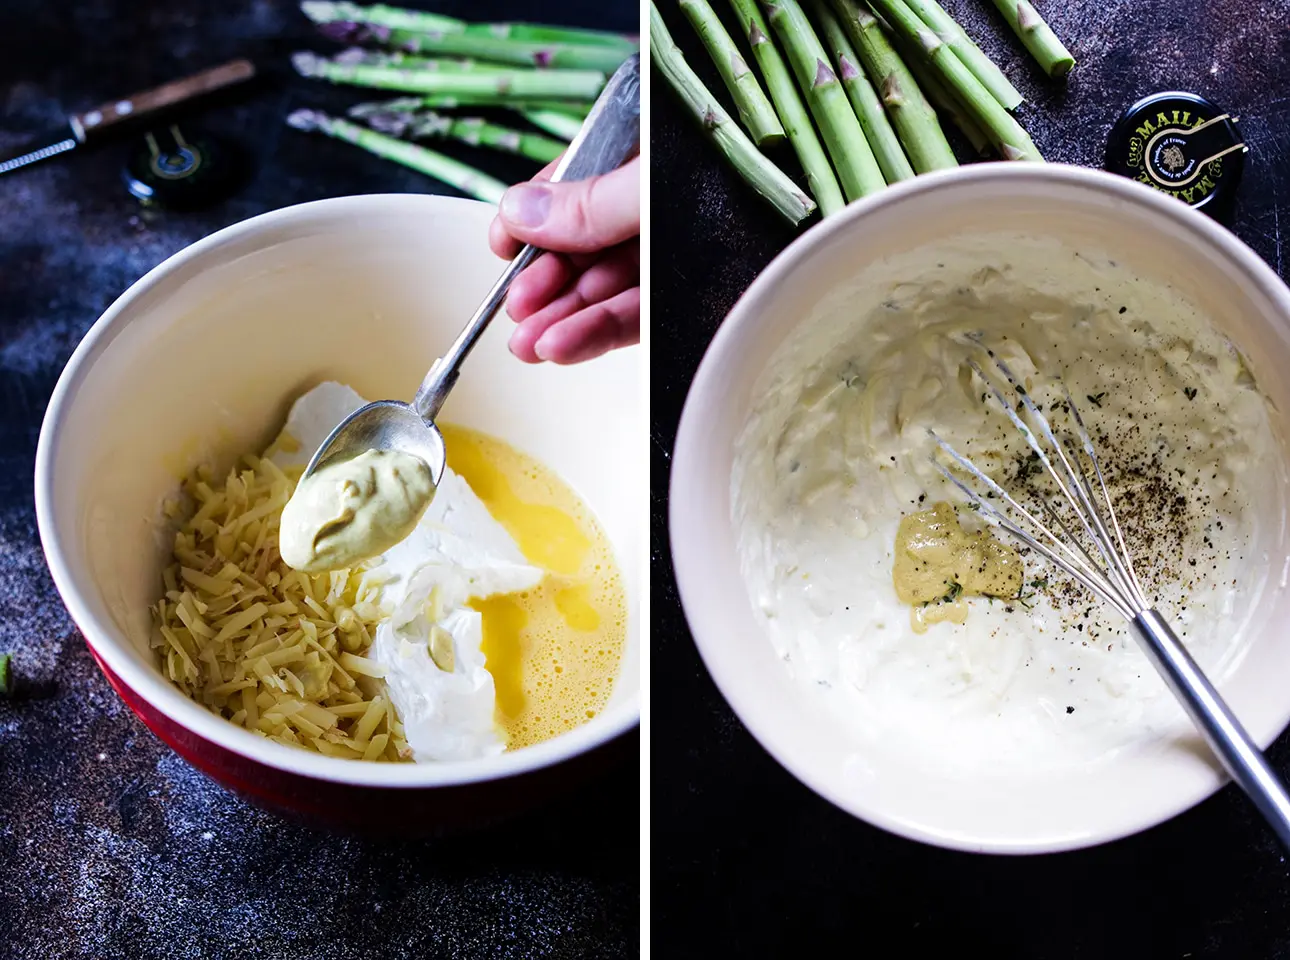 Collage: Mustard Being Added to a Mixing Bowl with Filling for Asparagus Quiche Next to a Bowl of Filling with a Whisk